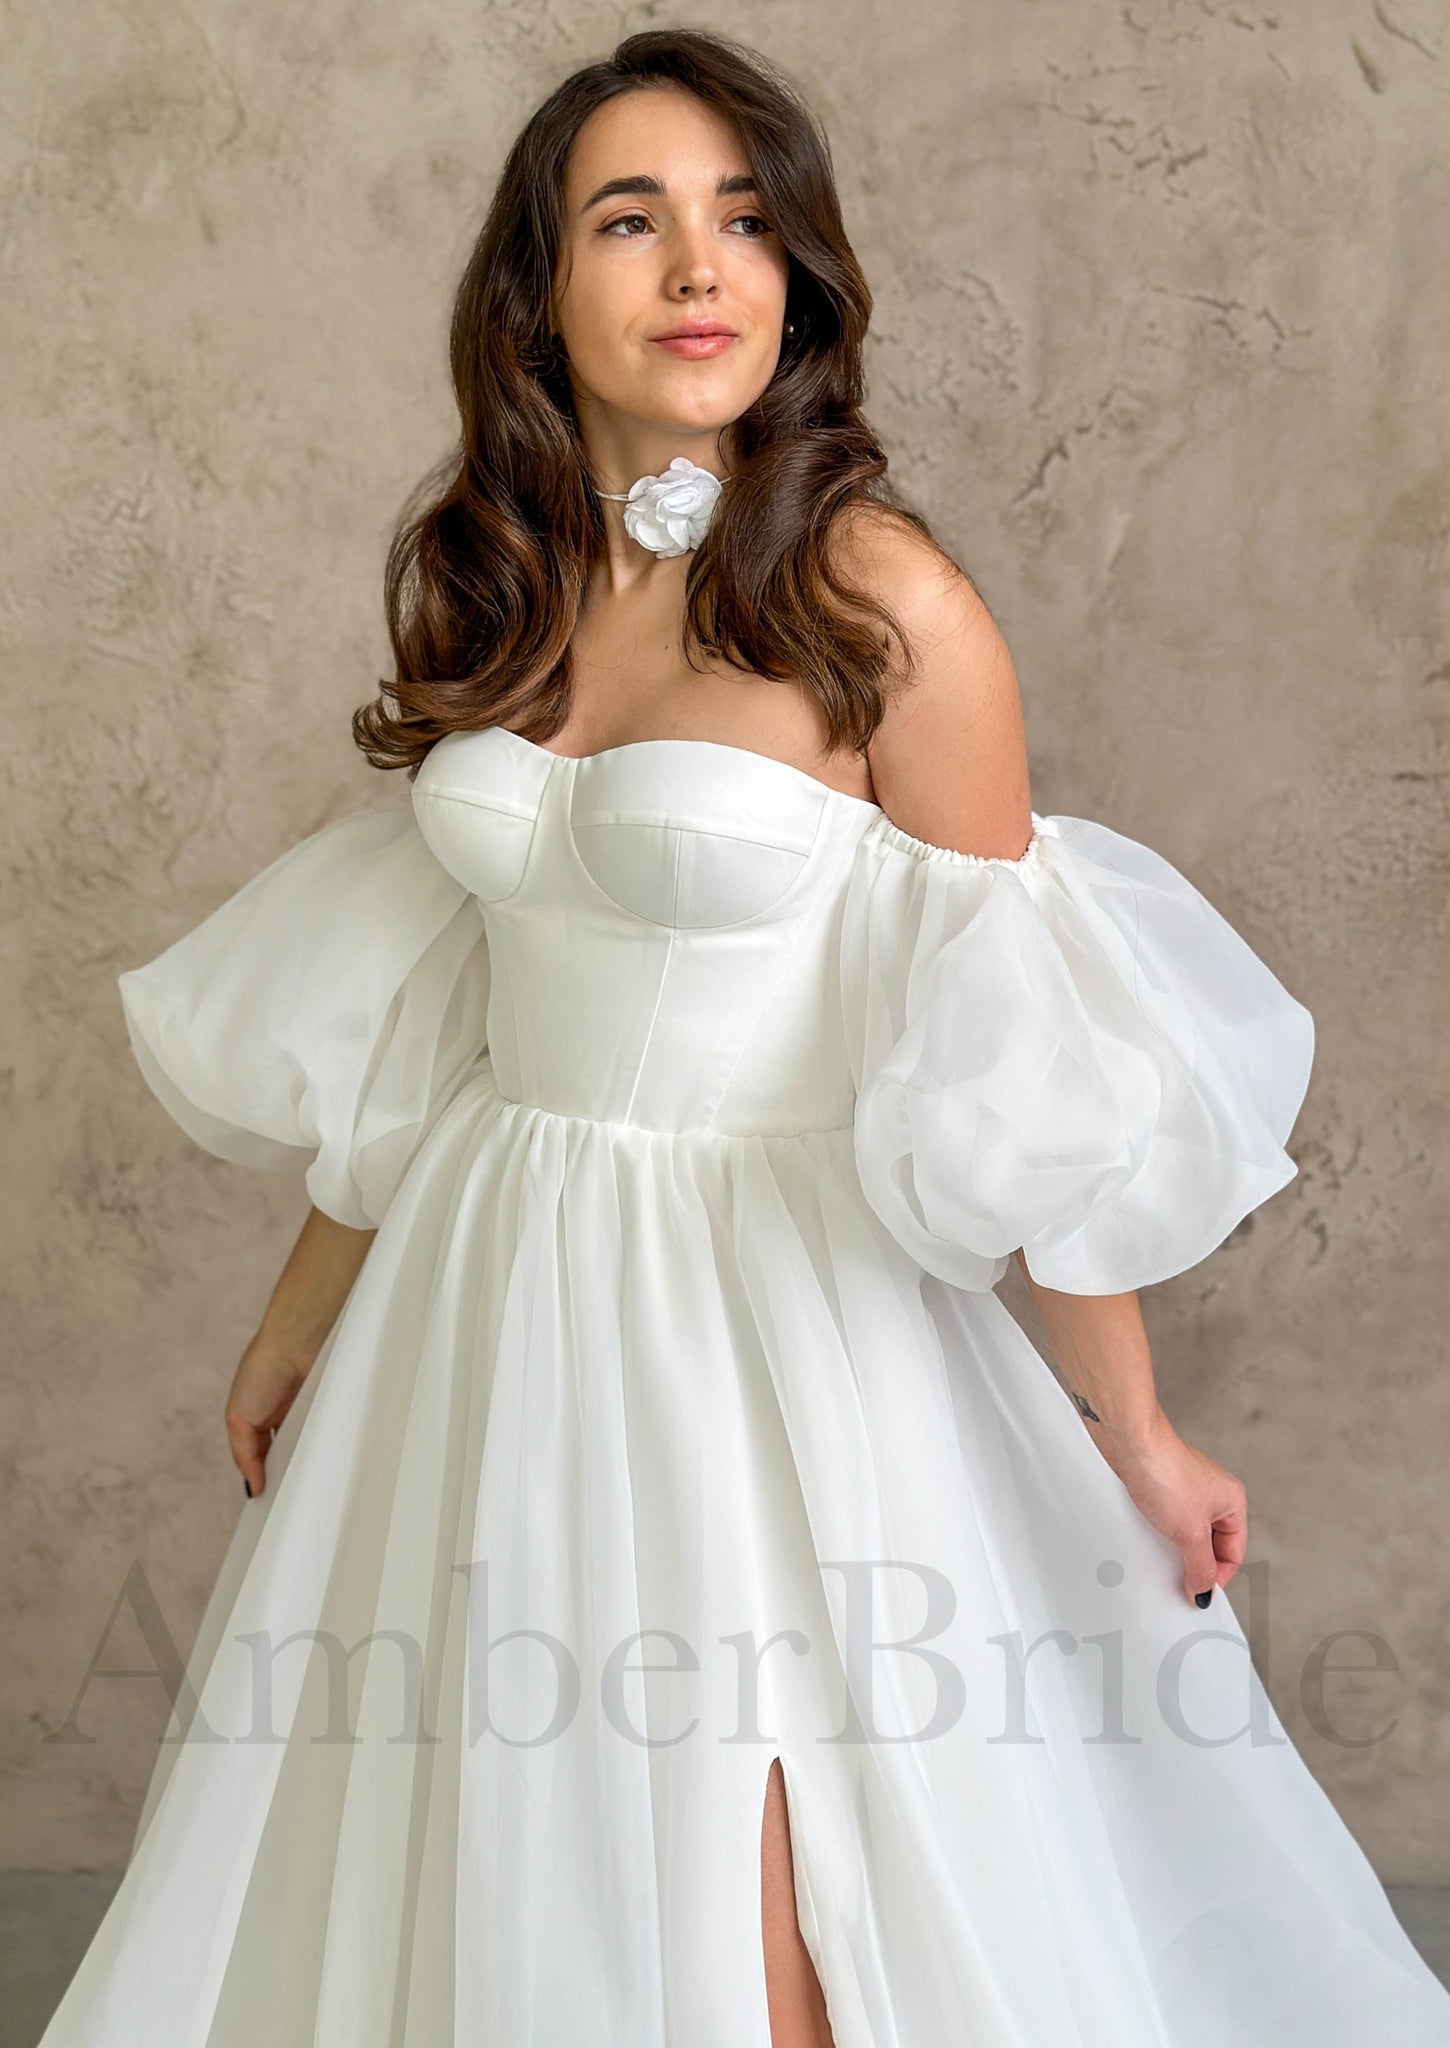 Elegant A Line Organza Wedding Dress with Off Shoulder Sweetheart Design and Puffed Sleeves